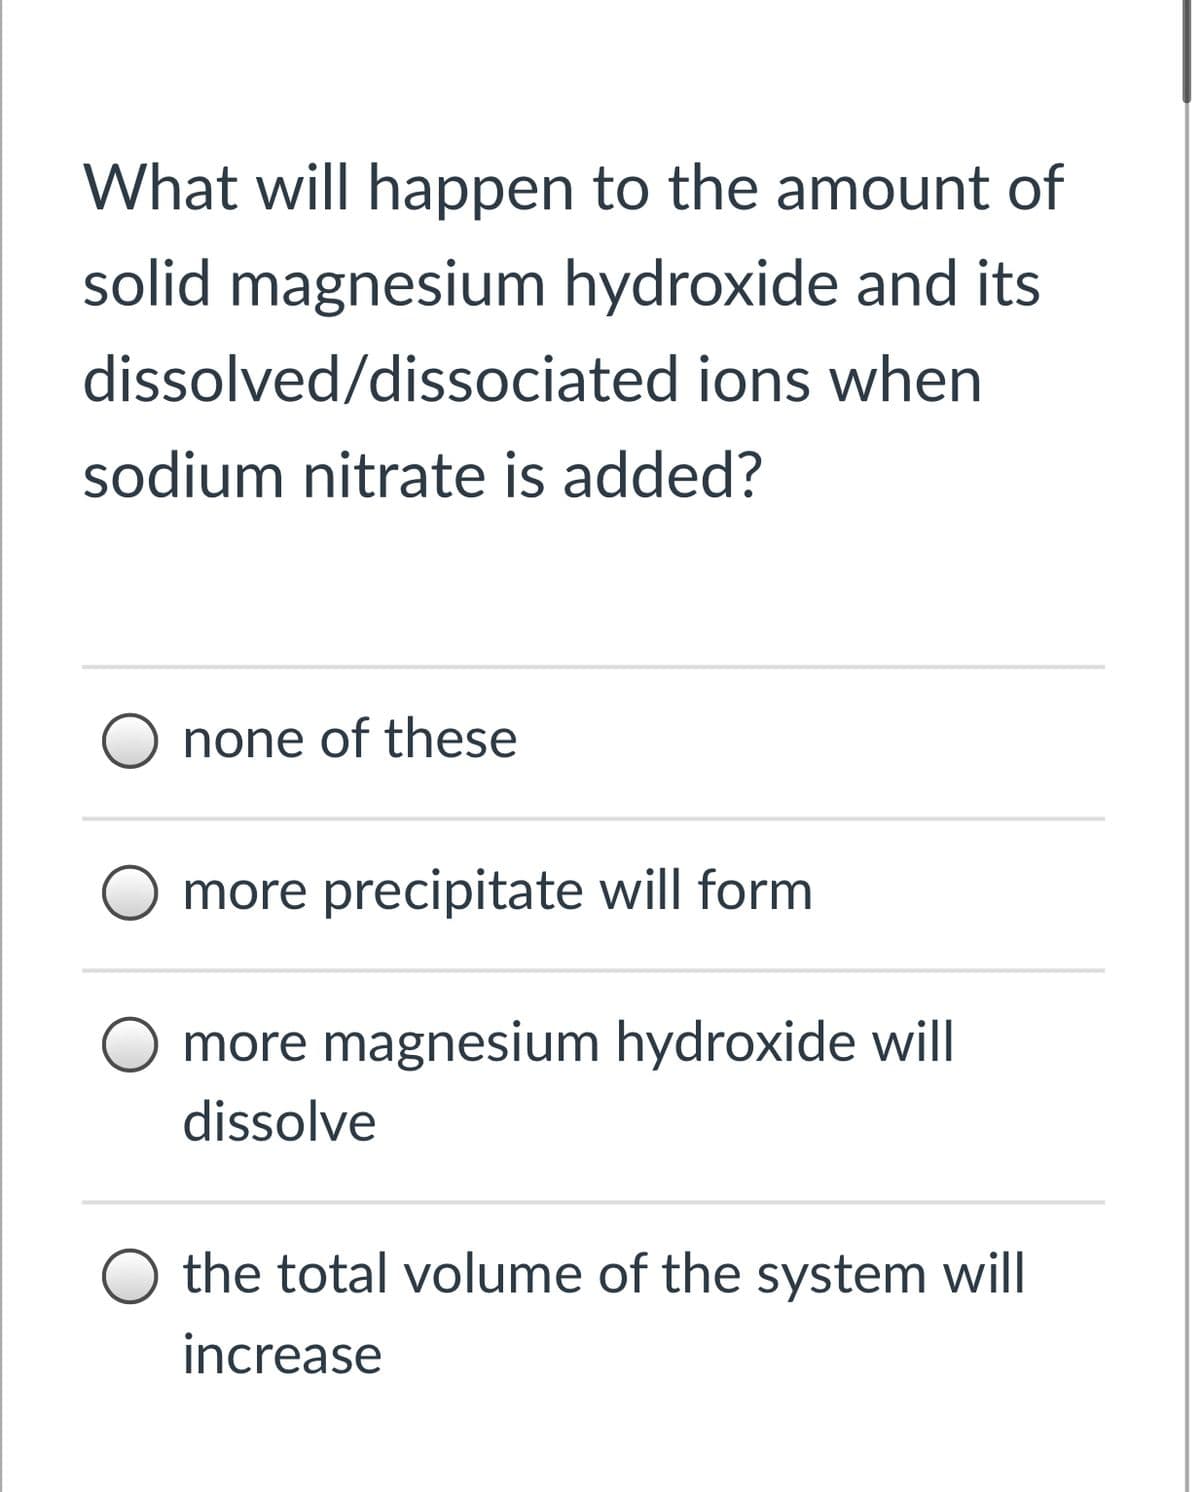 What will happen to the amount of
solid magnesium hydroxide and its
dissolved/dissociated ions when
sodium nitrate is added?
none of these
more precipitate will form
more magnesium hydroxide will
dissolve
O the total volume of the system will
increase
